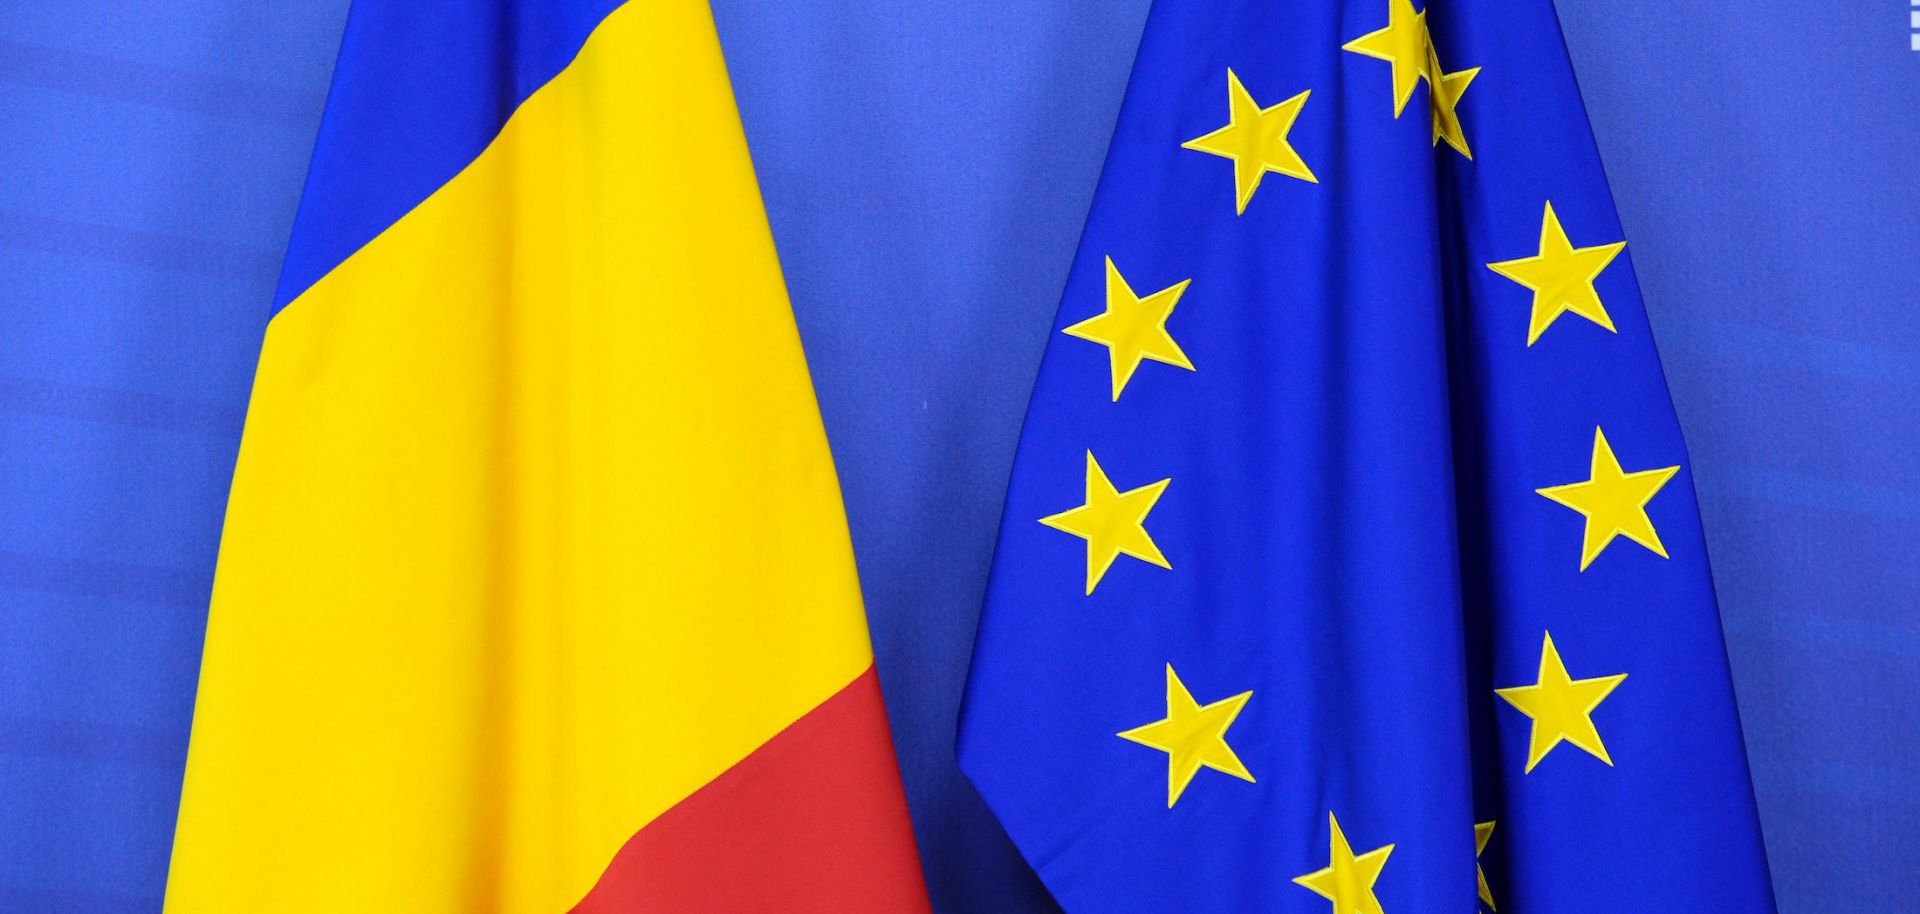 The Romanian and EU flags are seen at the European Commission's headquarters in Brussels, Belgium in February 2017.